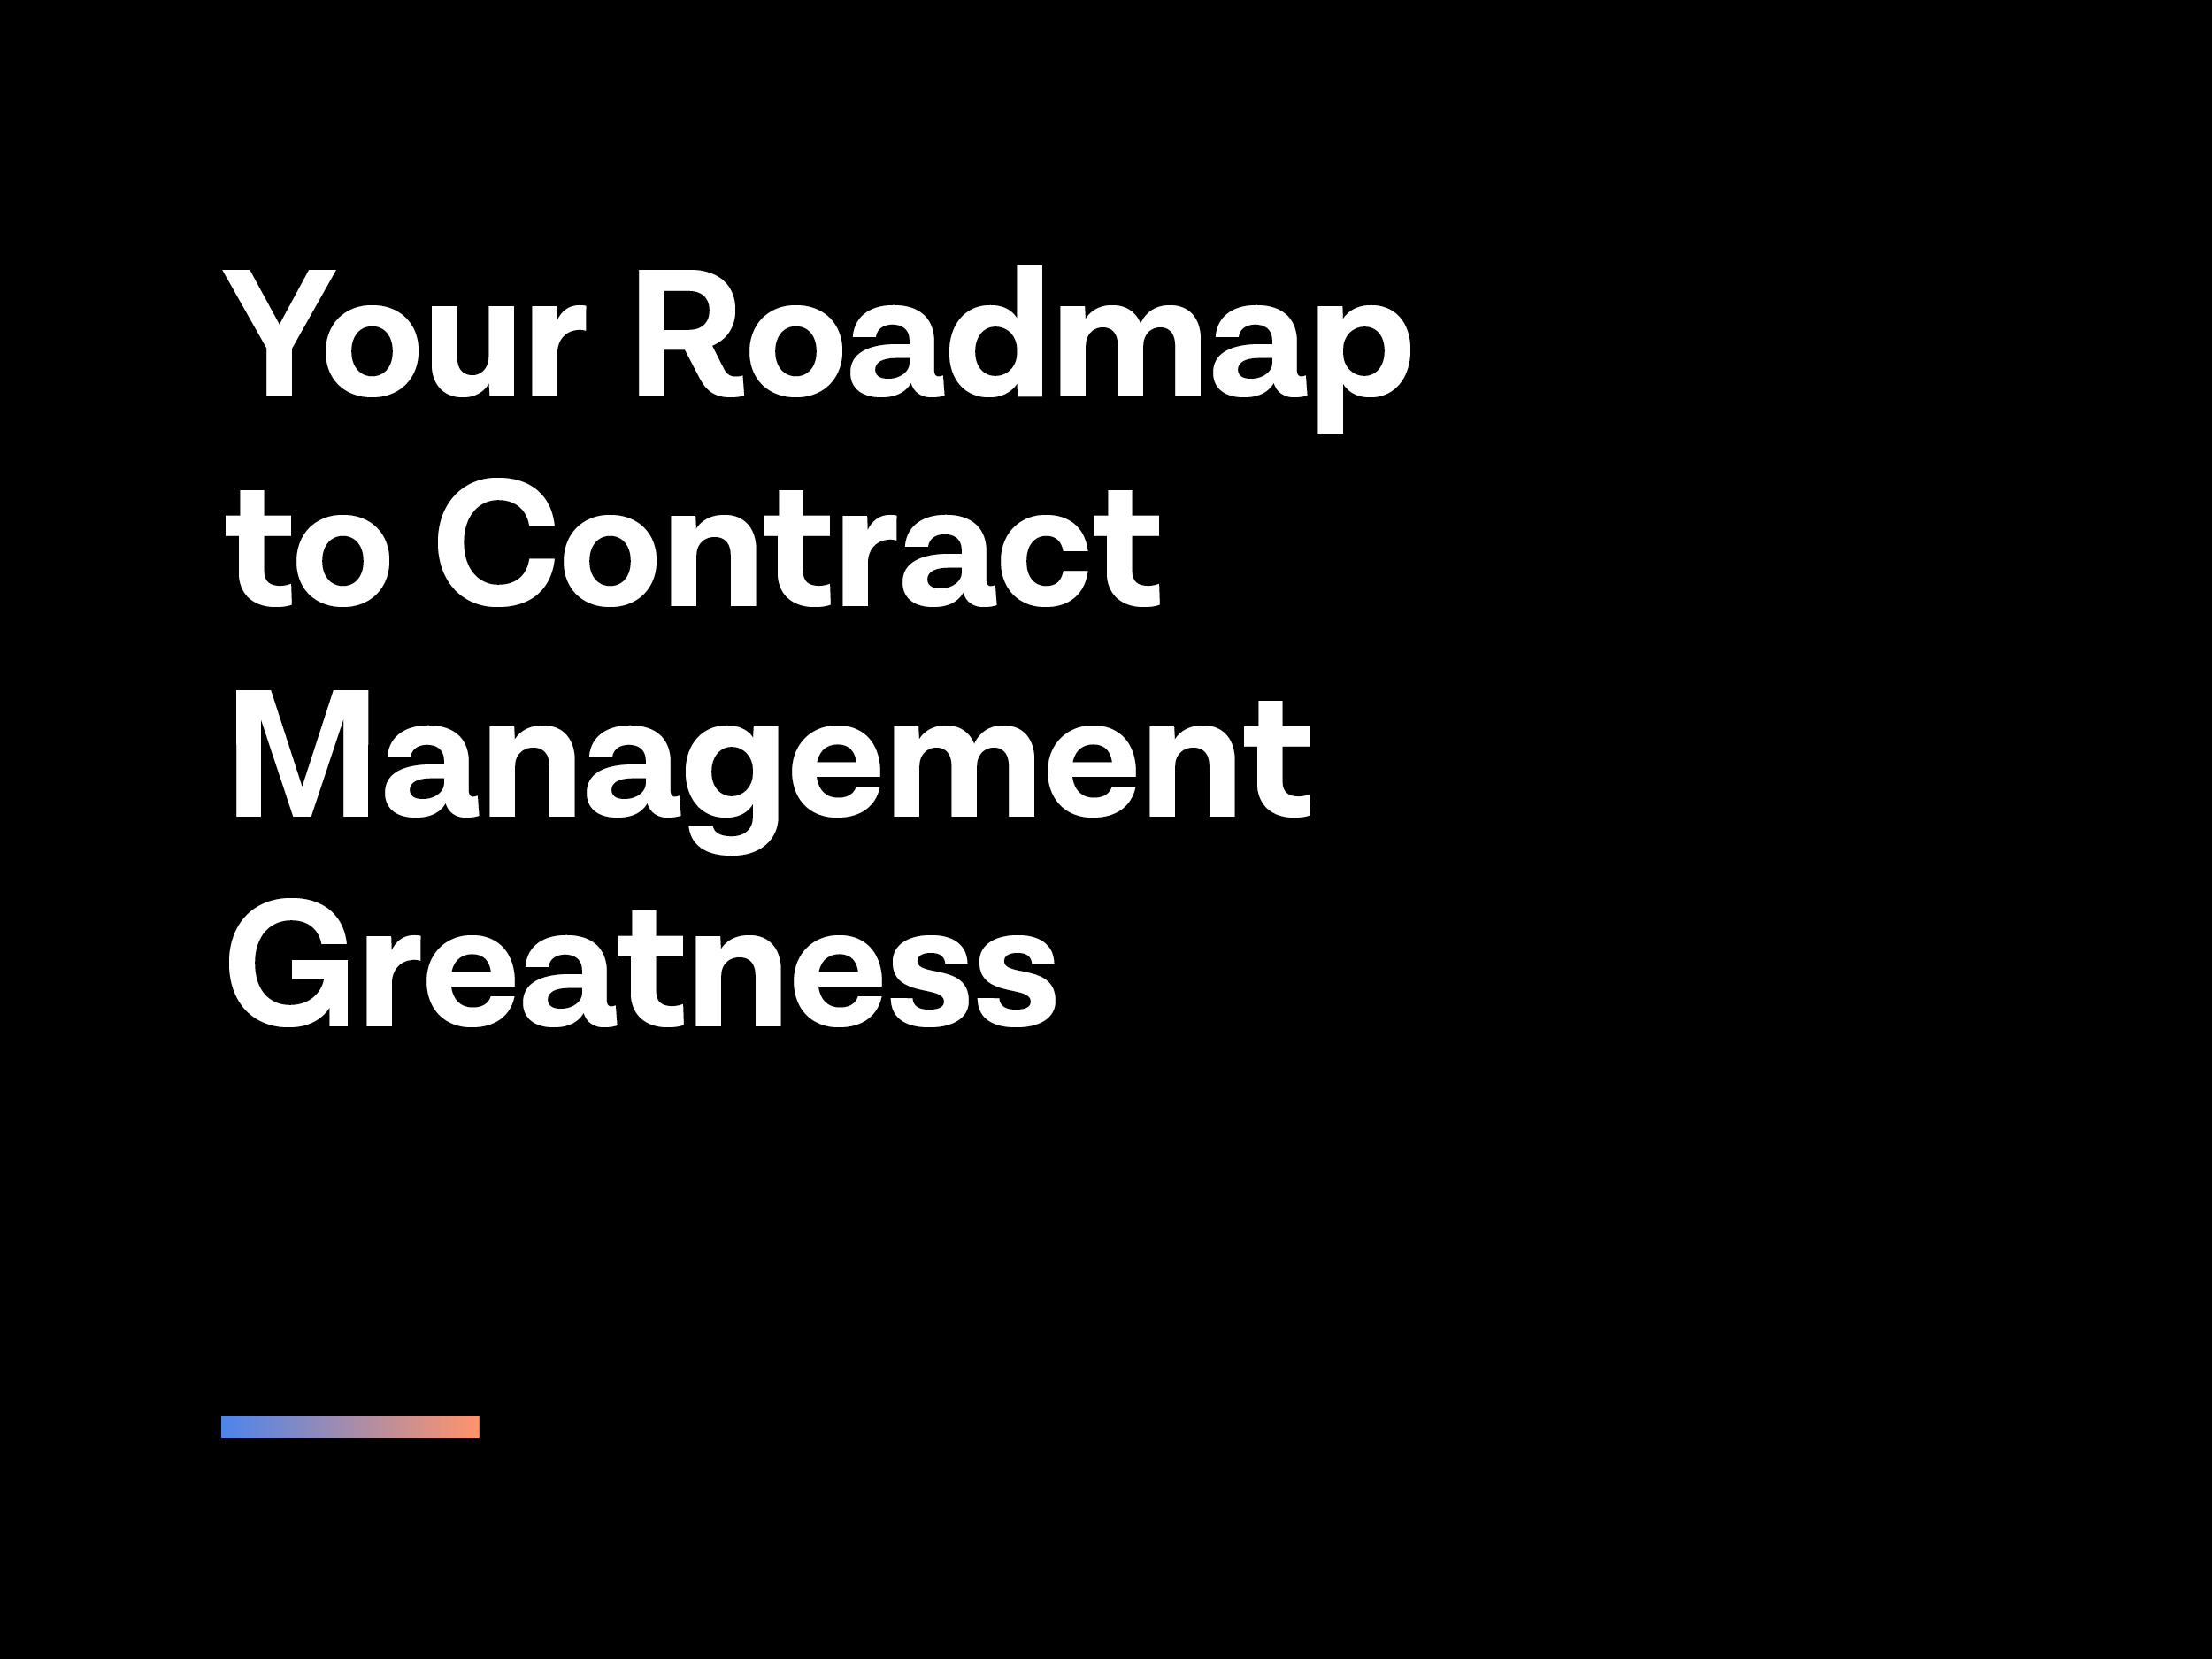 C365-OfferGraphics-Ebooks-Your-Roadmap-to-Contract-Management-Greatness